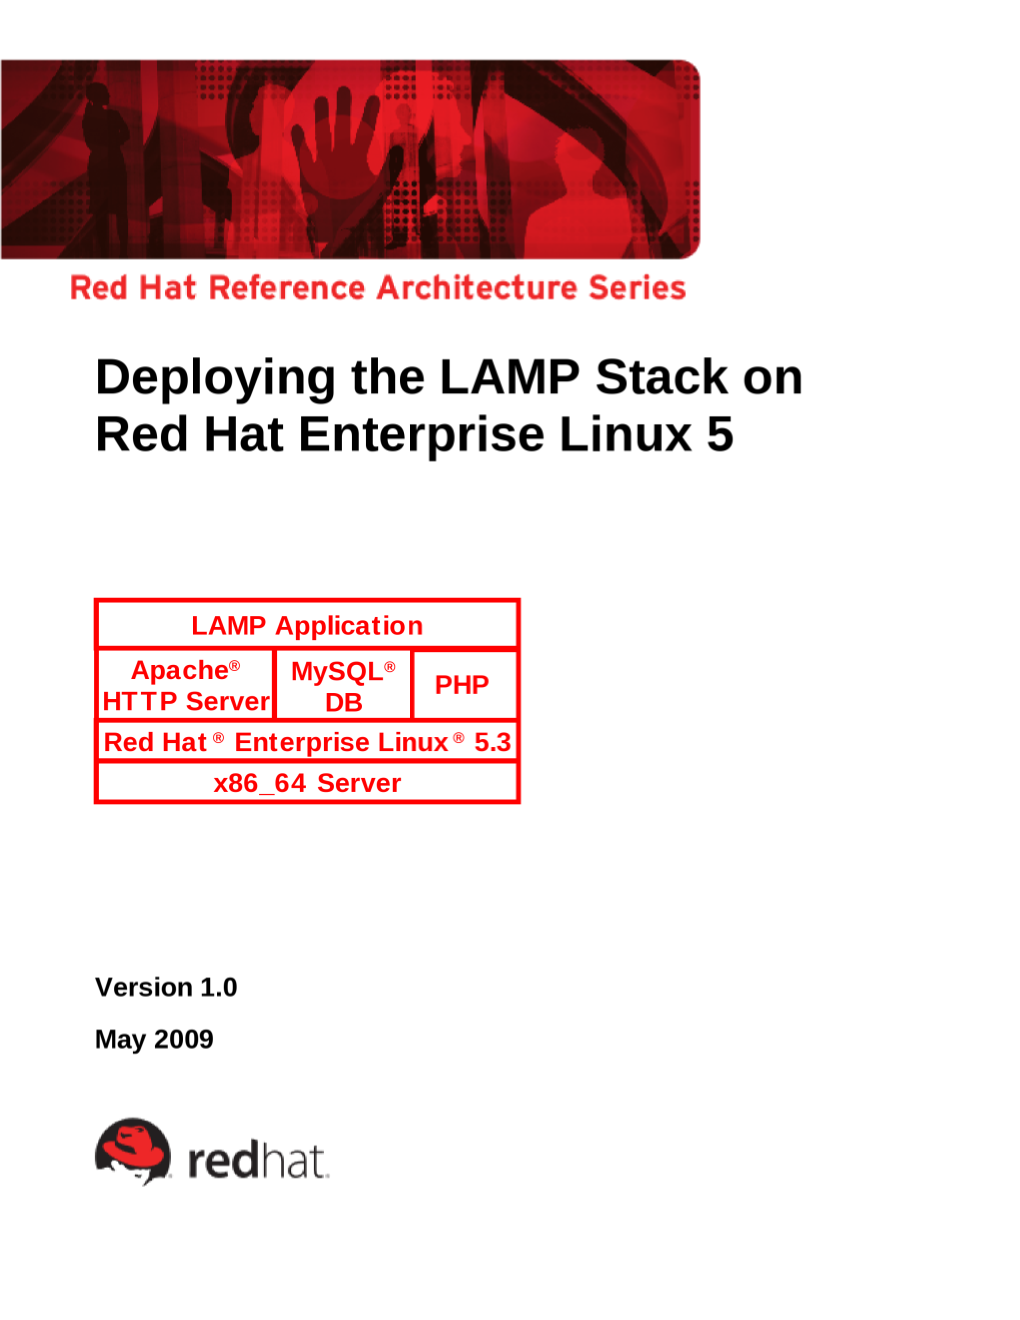 Deploying the LAMP Stack on Red Hat Enterprise Linux 5